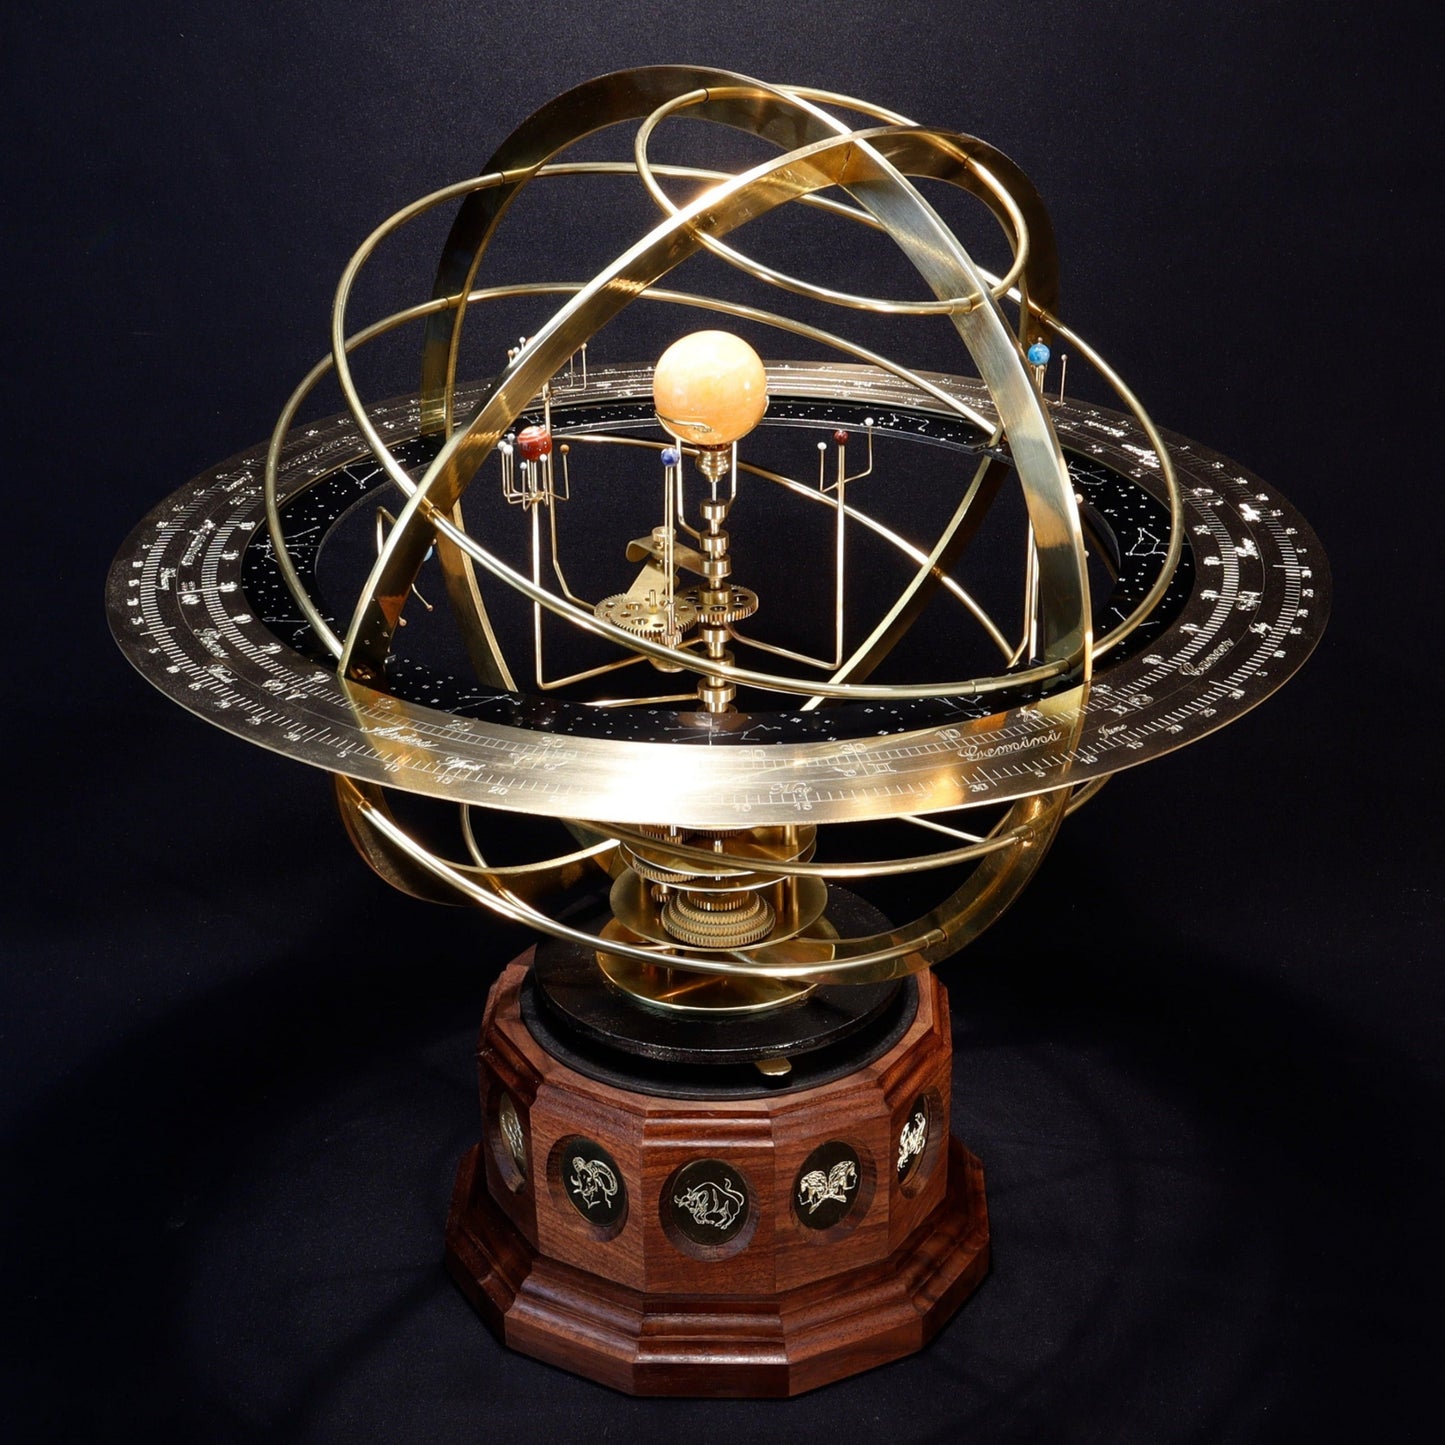 Tower Orrery with engraved zodiacal panels, semi-precious stone planet set and full armillary sphere from Science Art